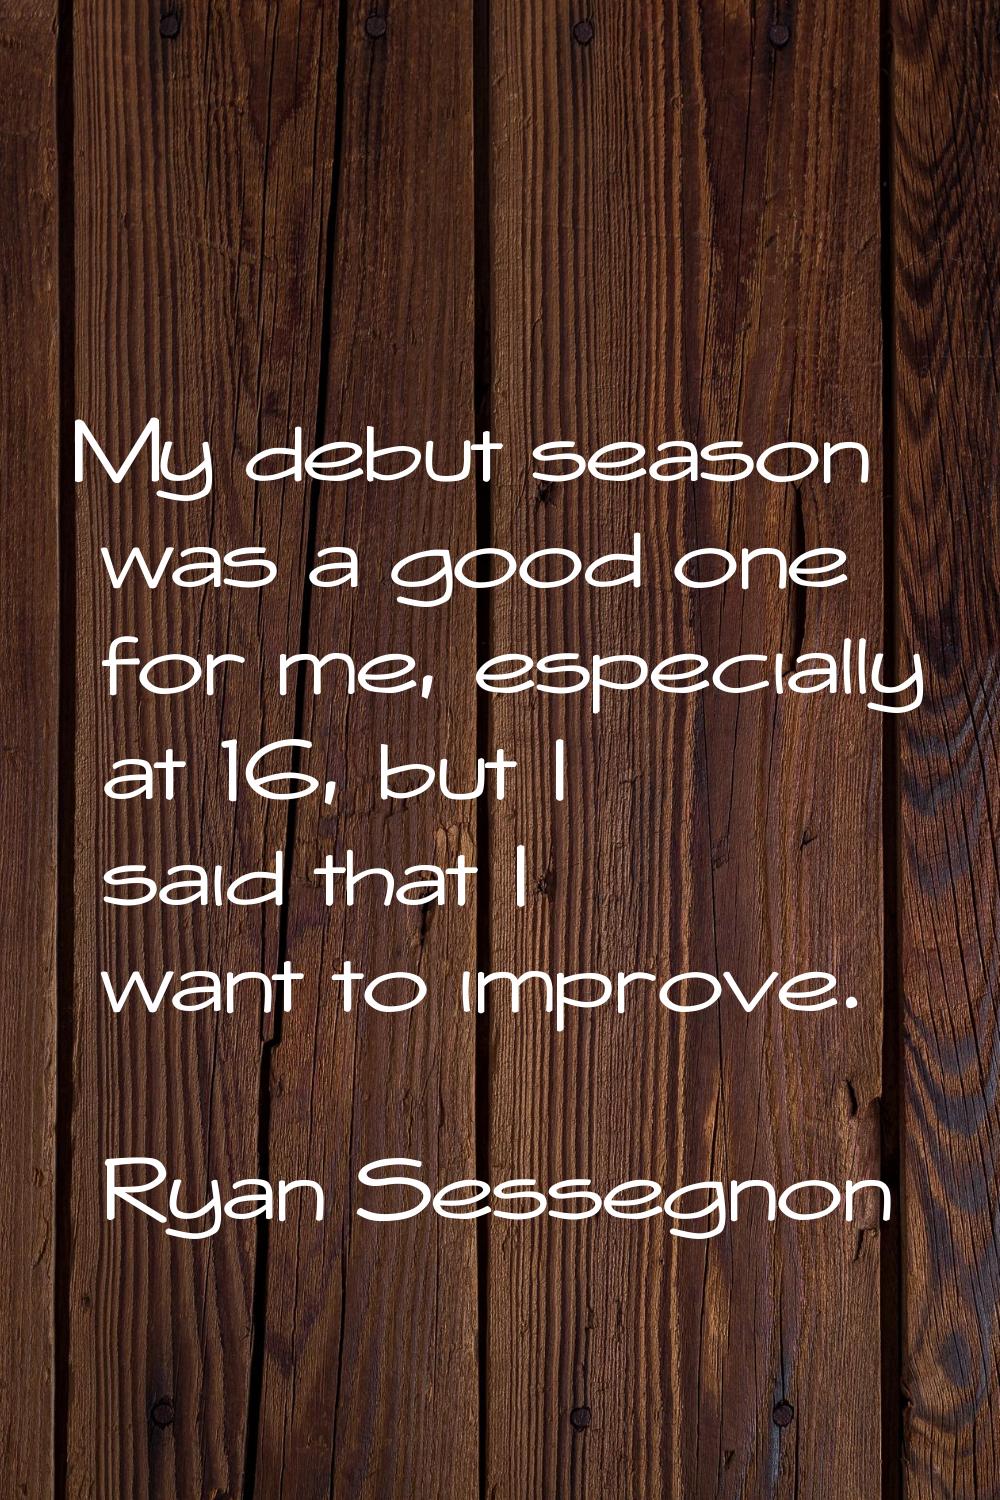 My debut season was a good one for me, especially at 16, but I said that I want to improve.